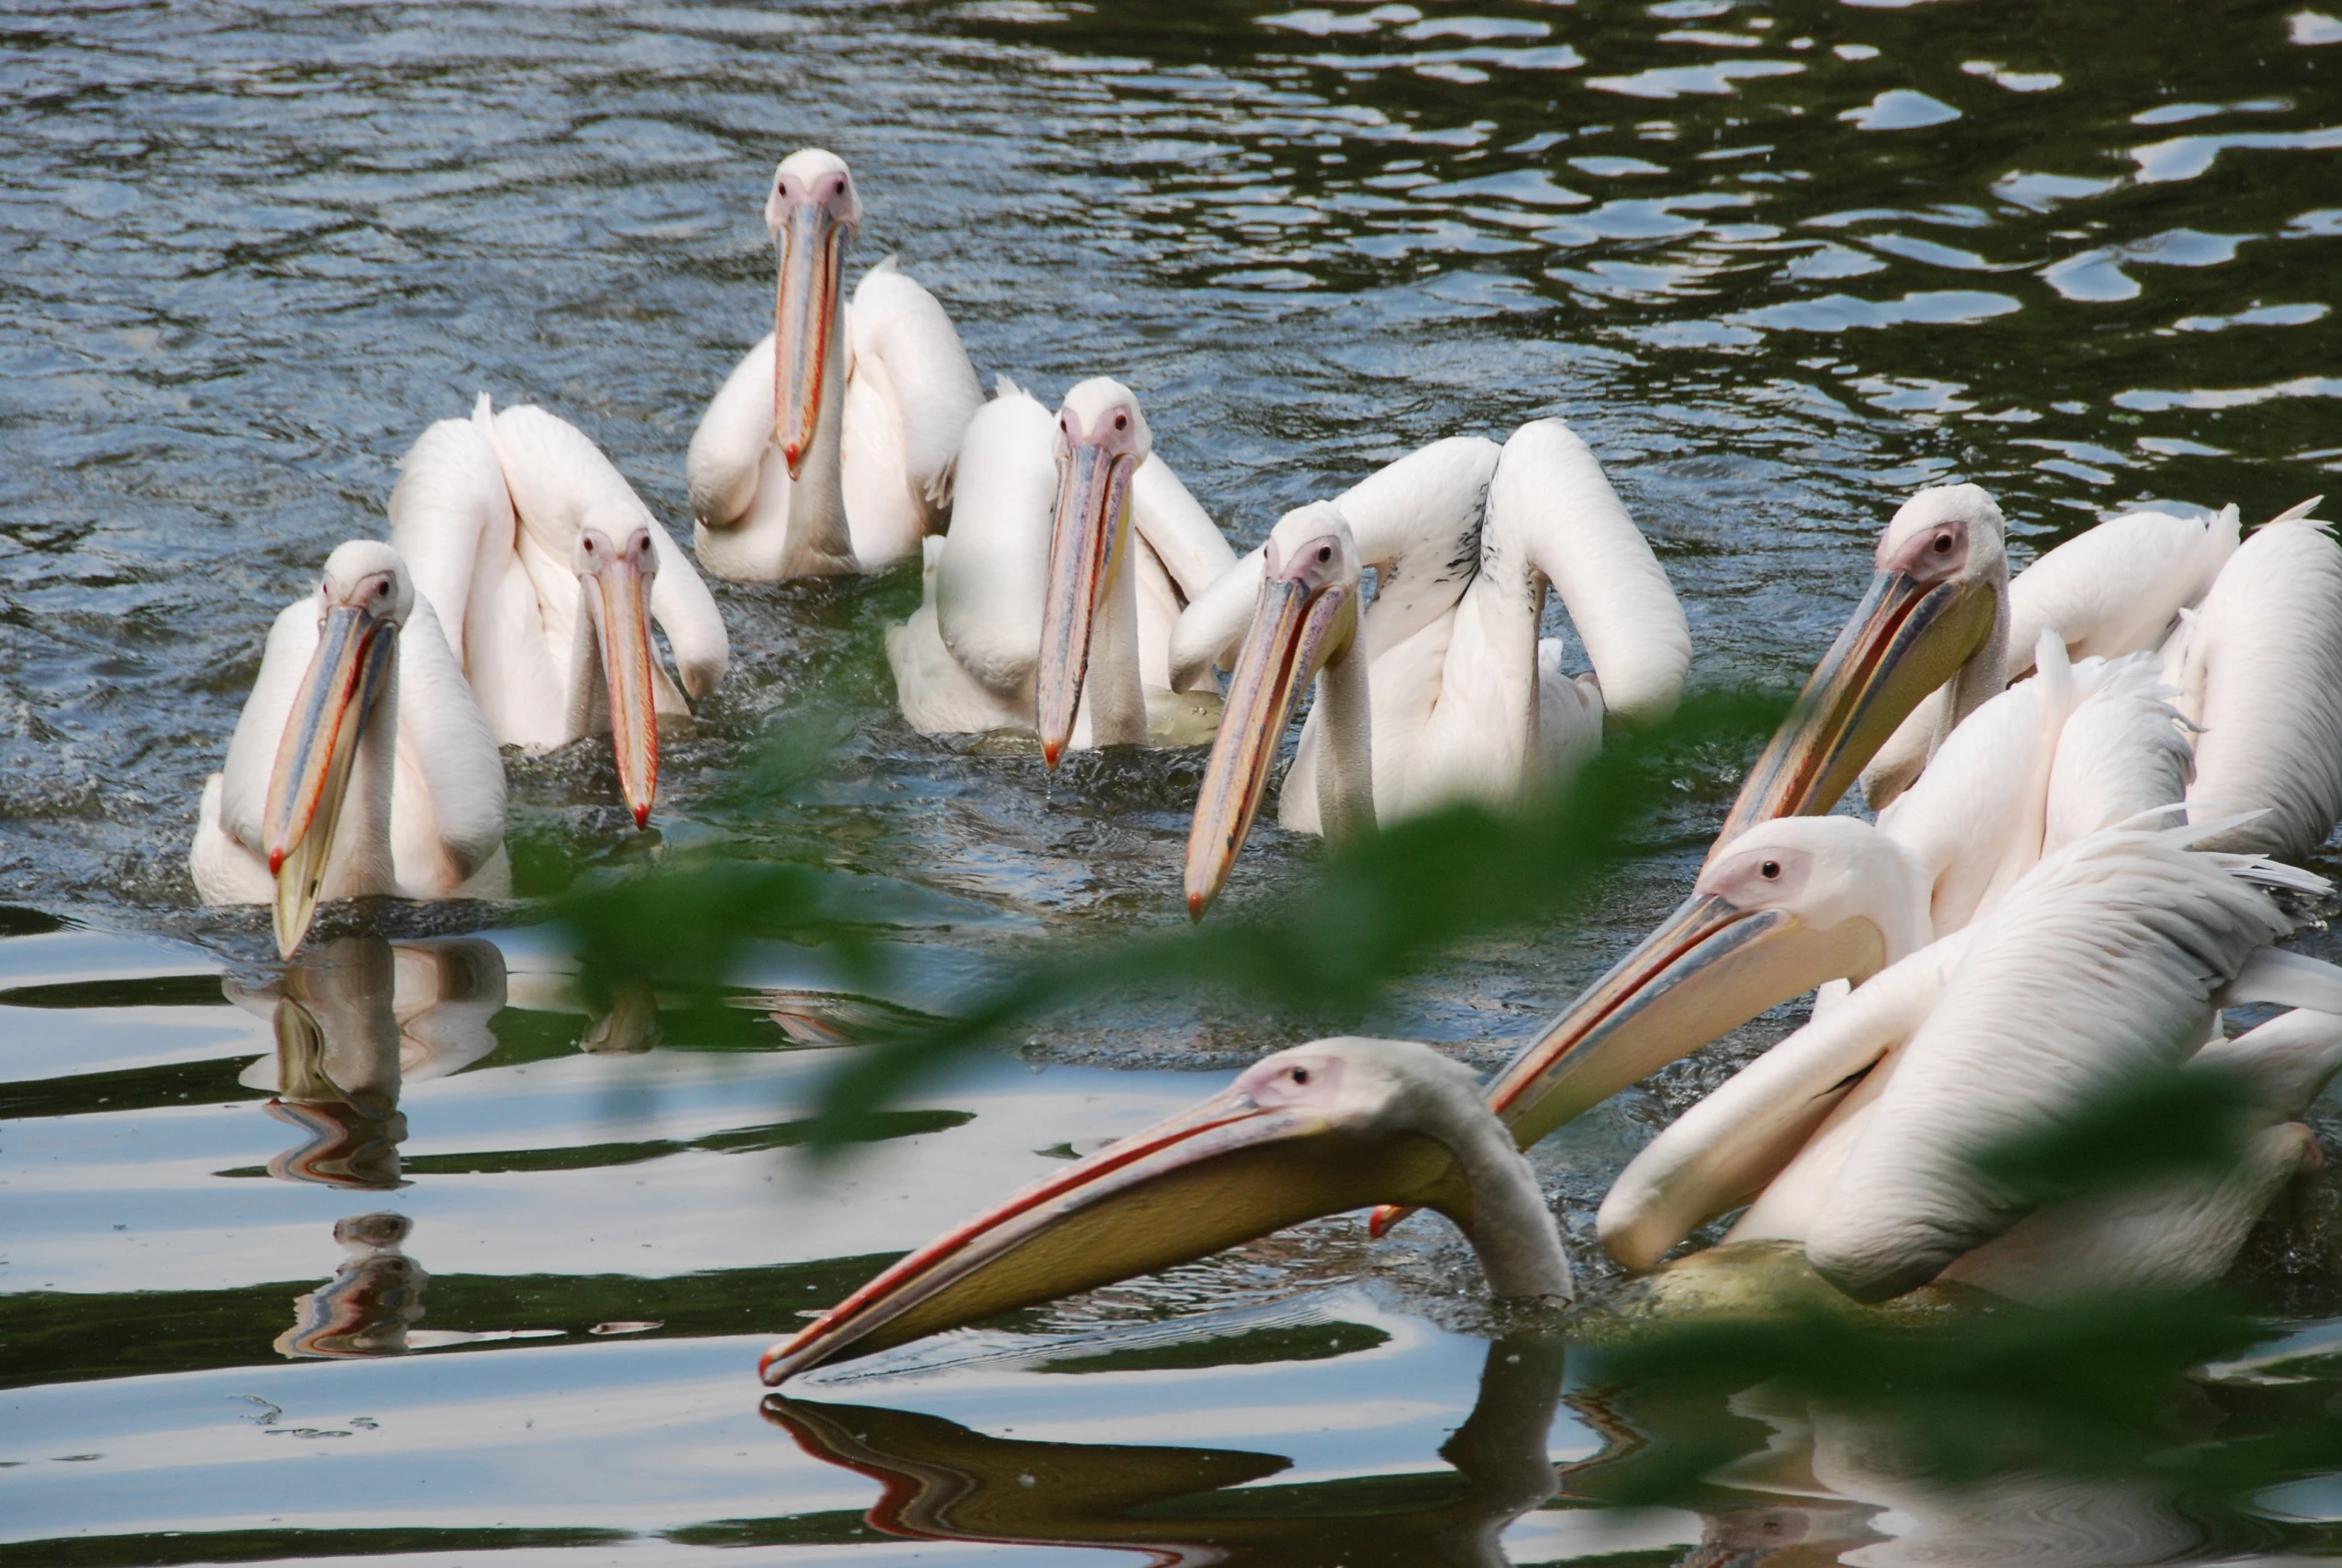 the pelicans are all standing around in the water